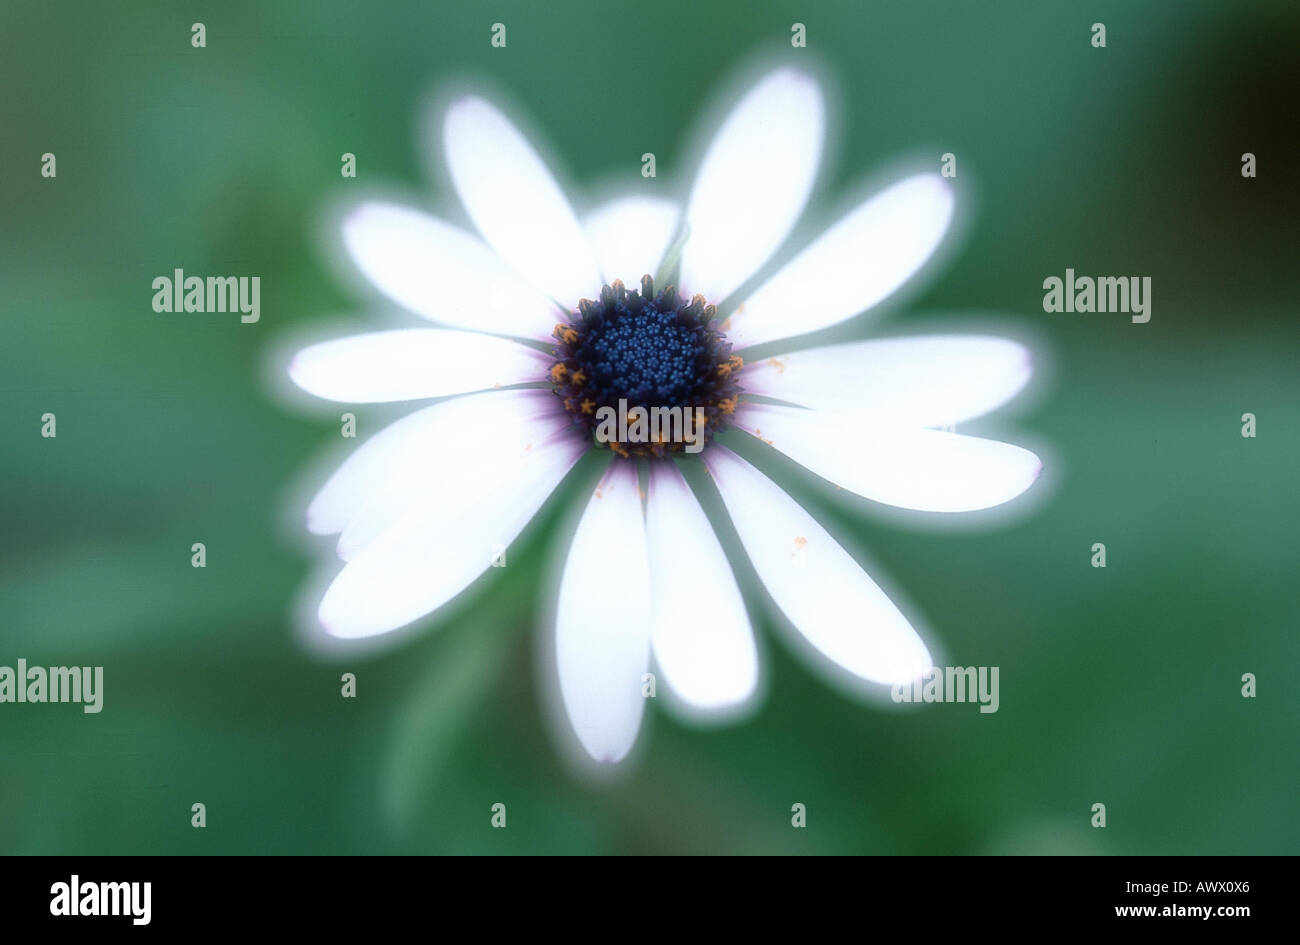 African Daisy, Lavender African Daisy, Norlindh freeway daisy (Osteospermum ecklonis), inflorescence, double exposure Stock Photo